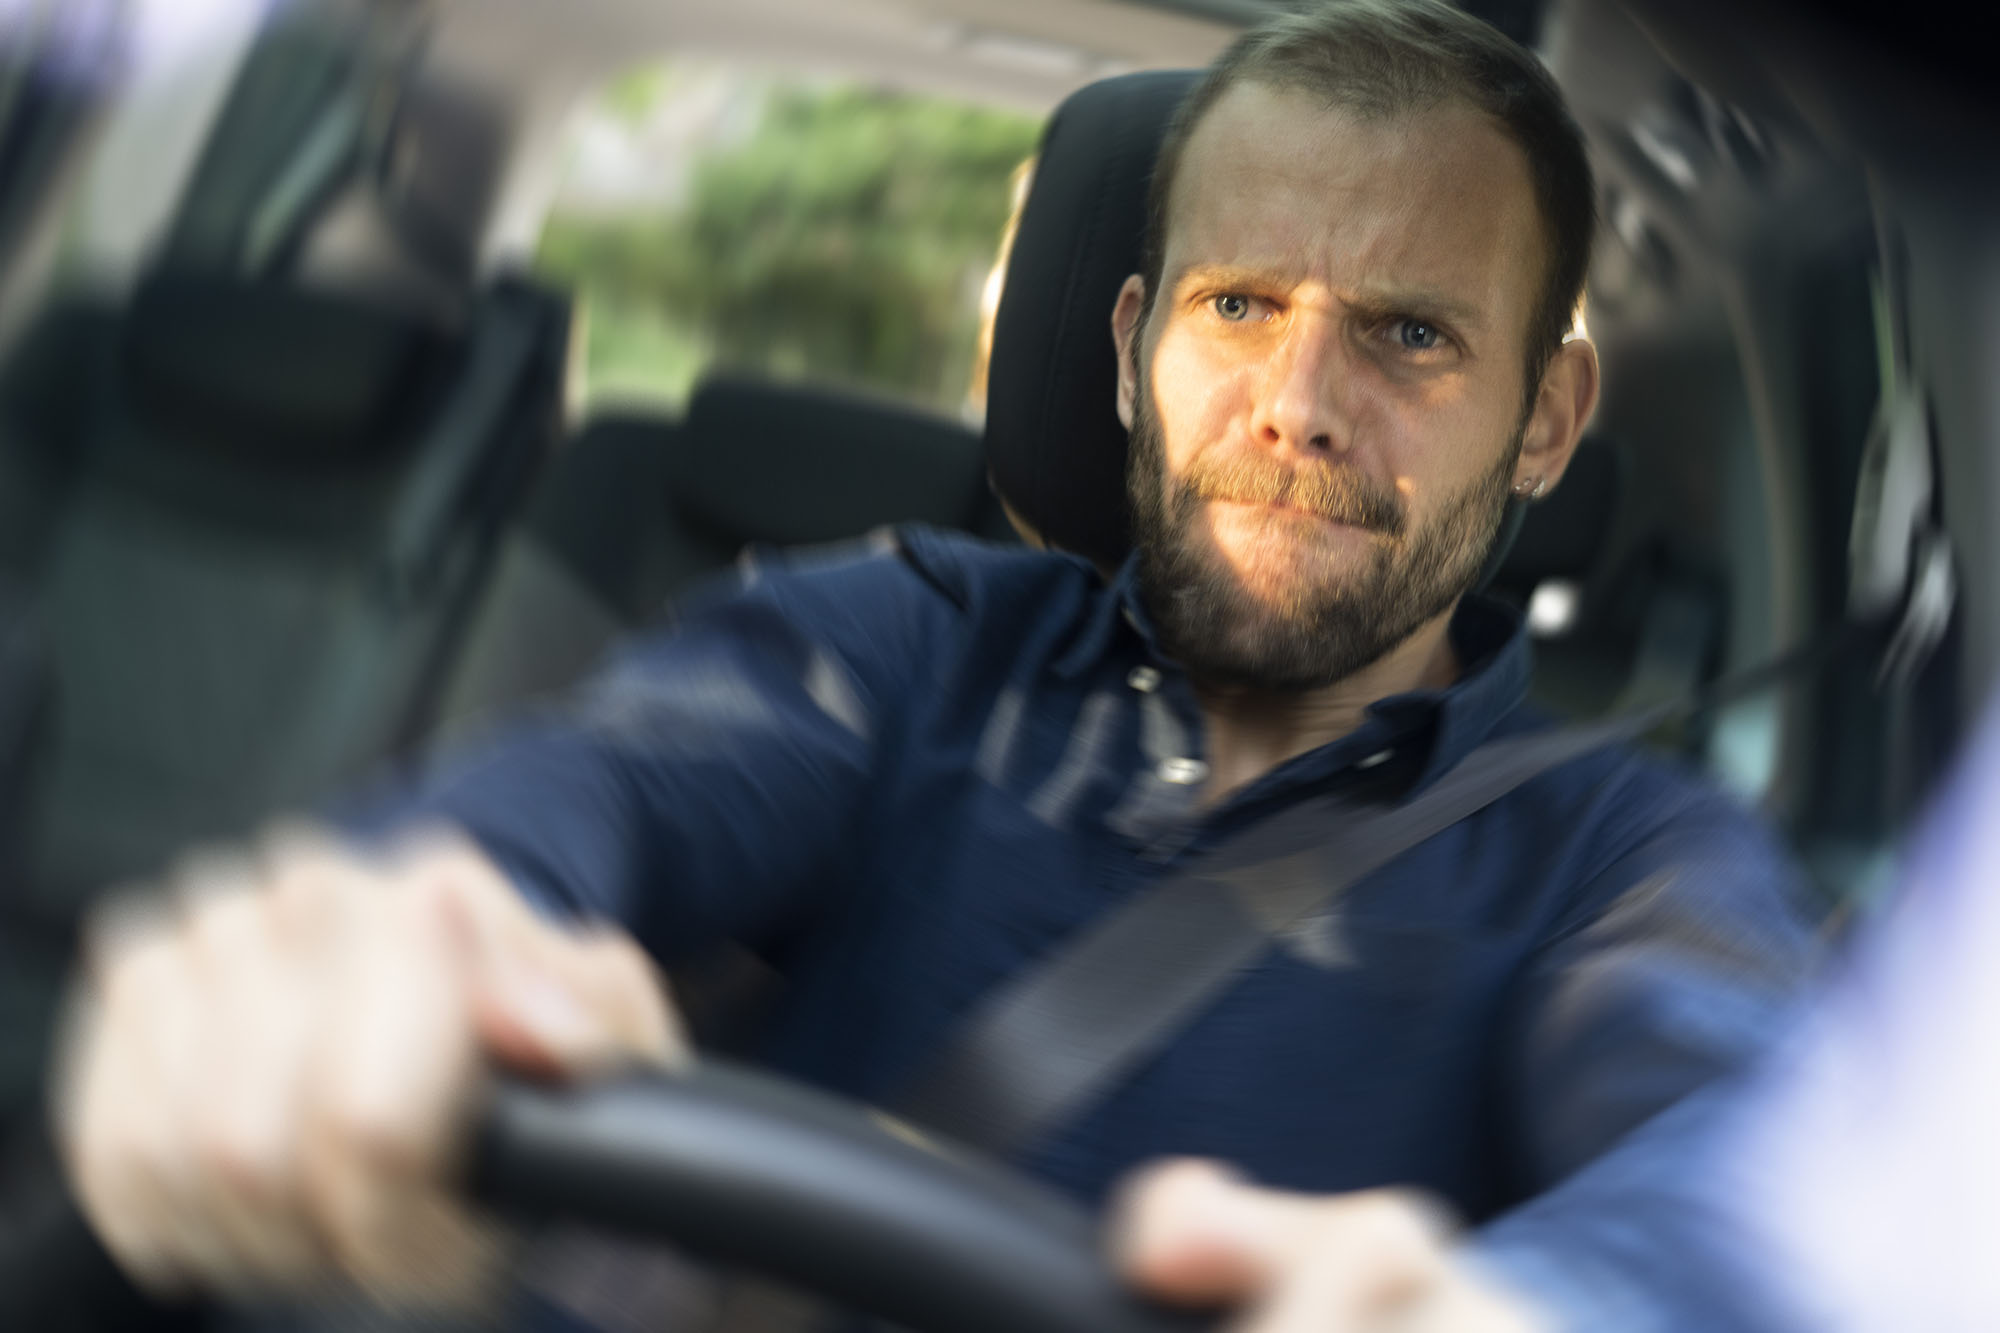 Person driving car with blurred surroundings